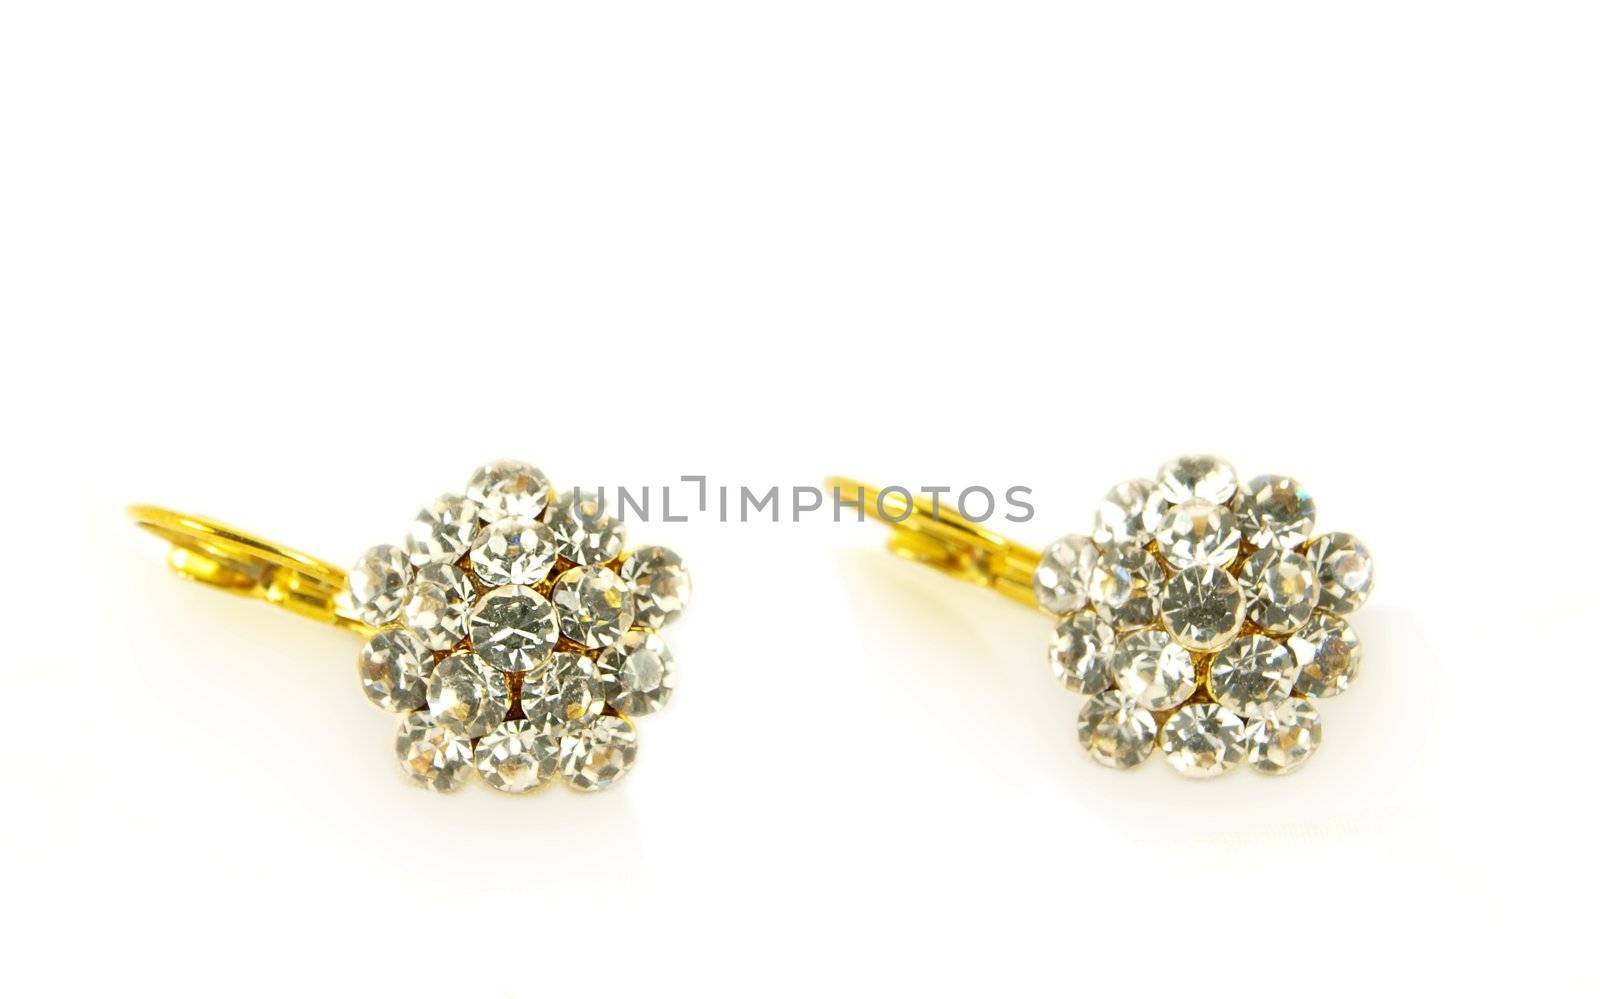 Diamond earrings on yellow gold, isolated towards white background